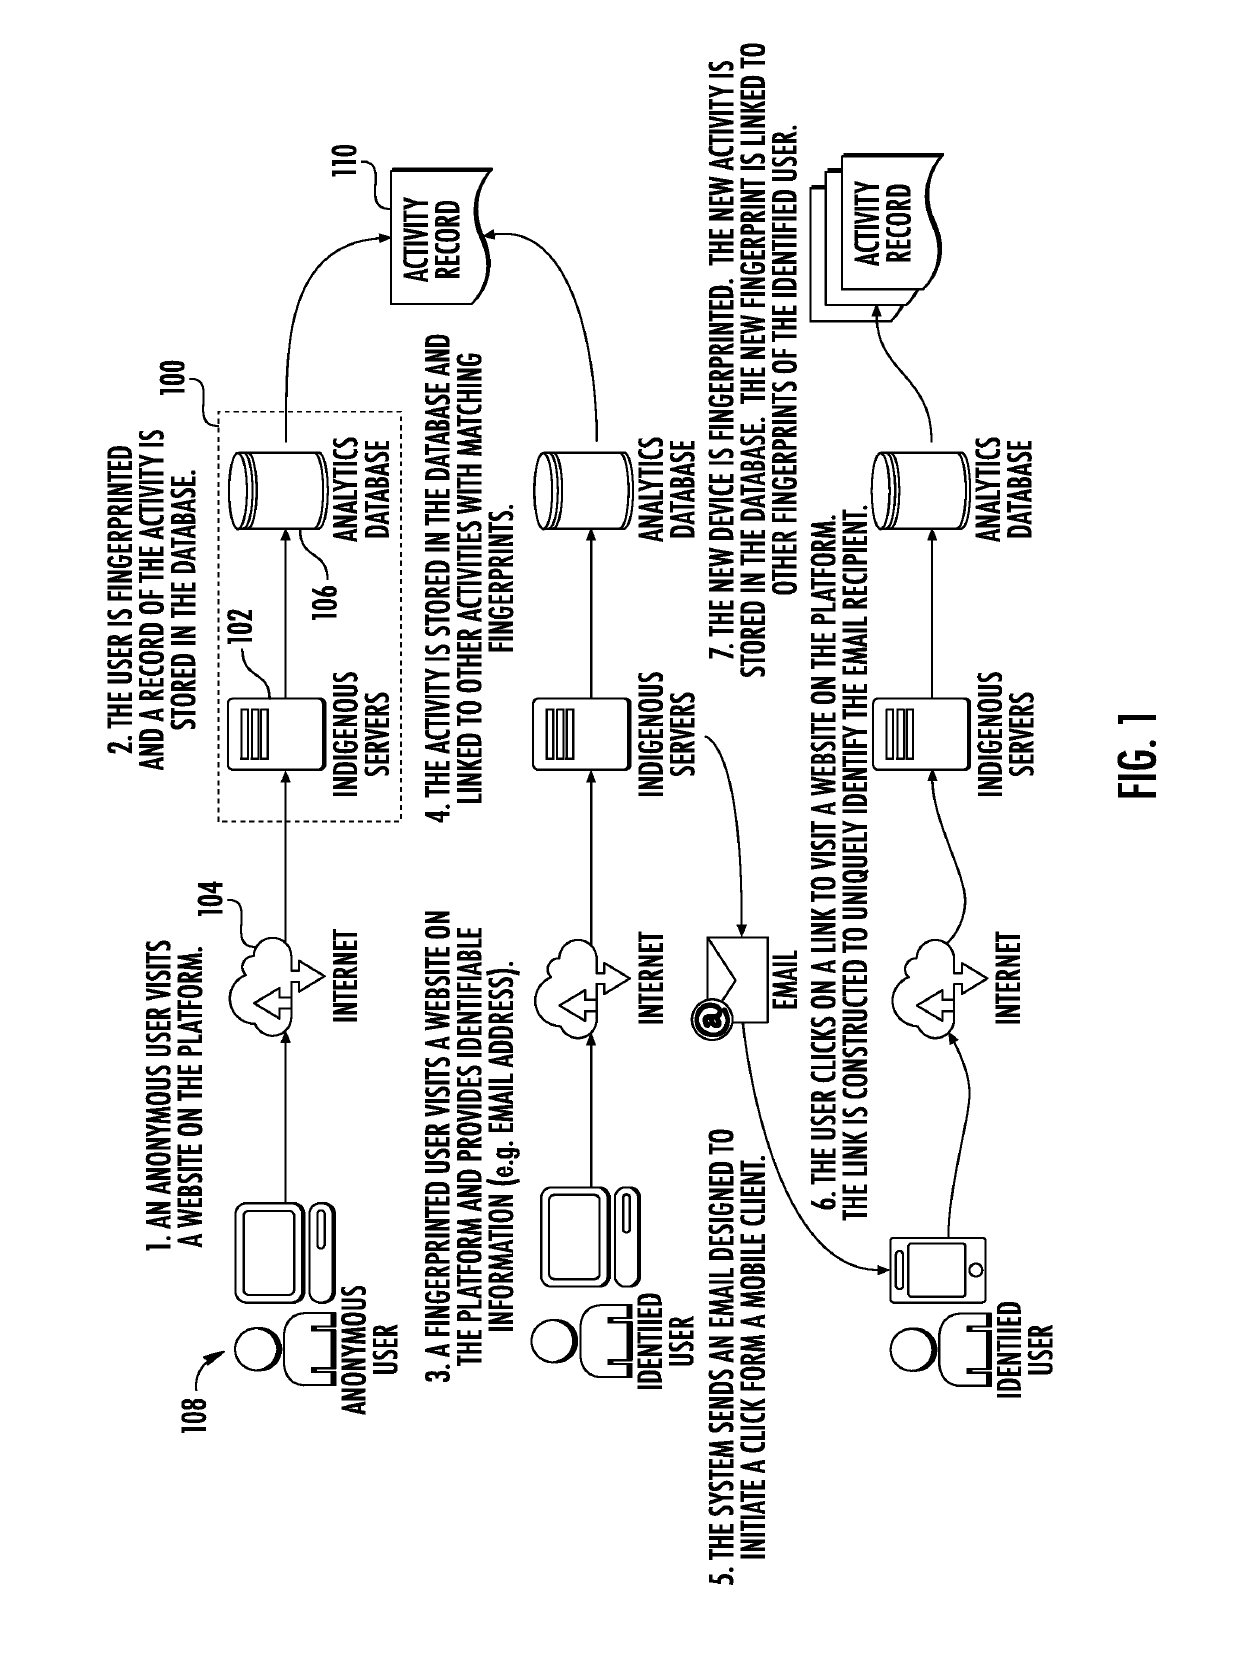 System and method for tracking online user behavior across browsers or devices